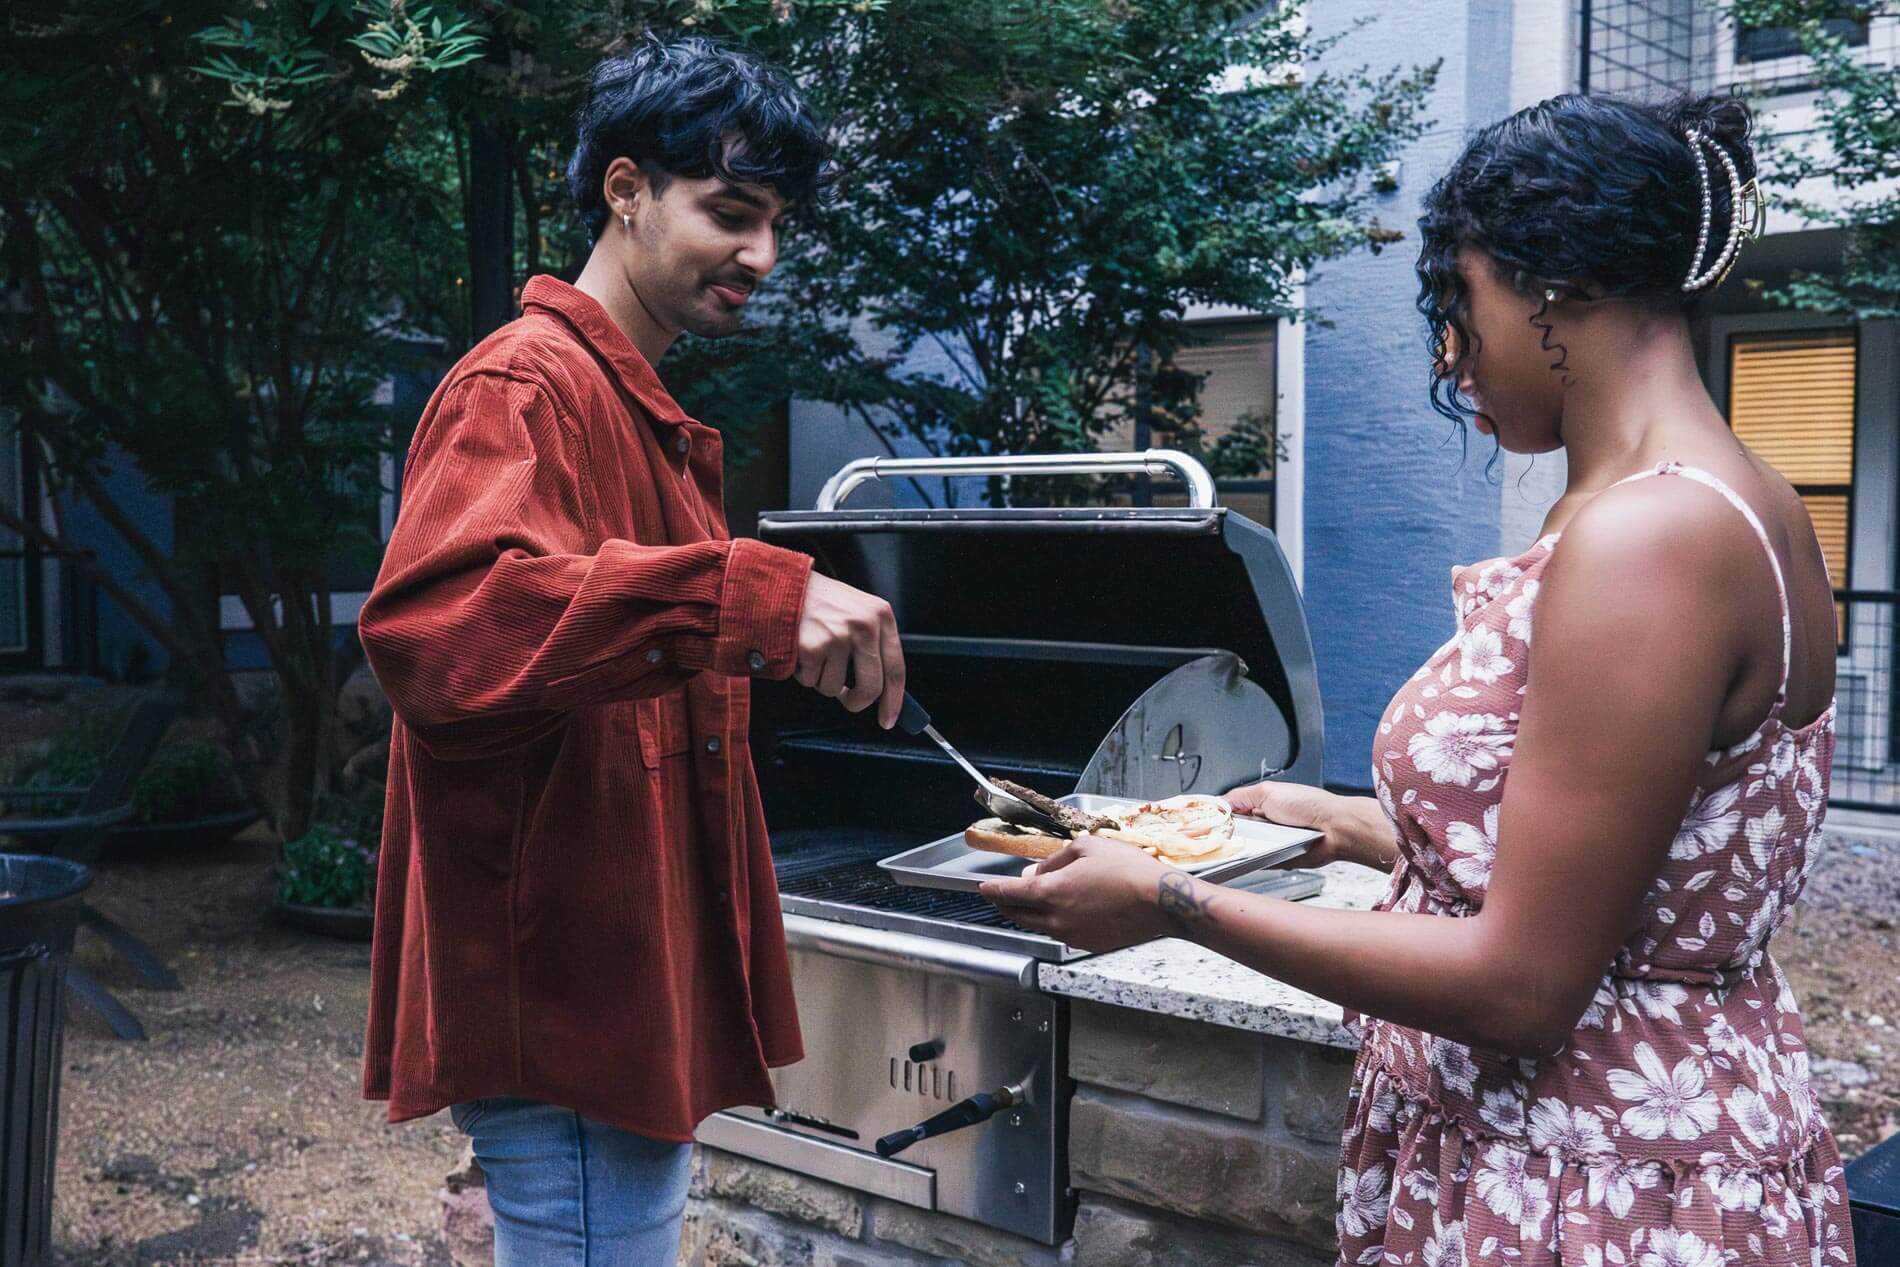 Cool Springs a man serves a woman a burger from a grill